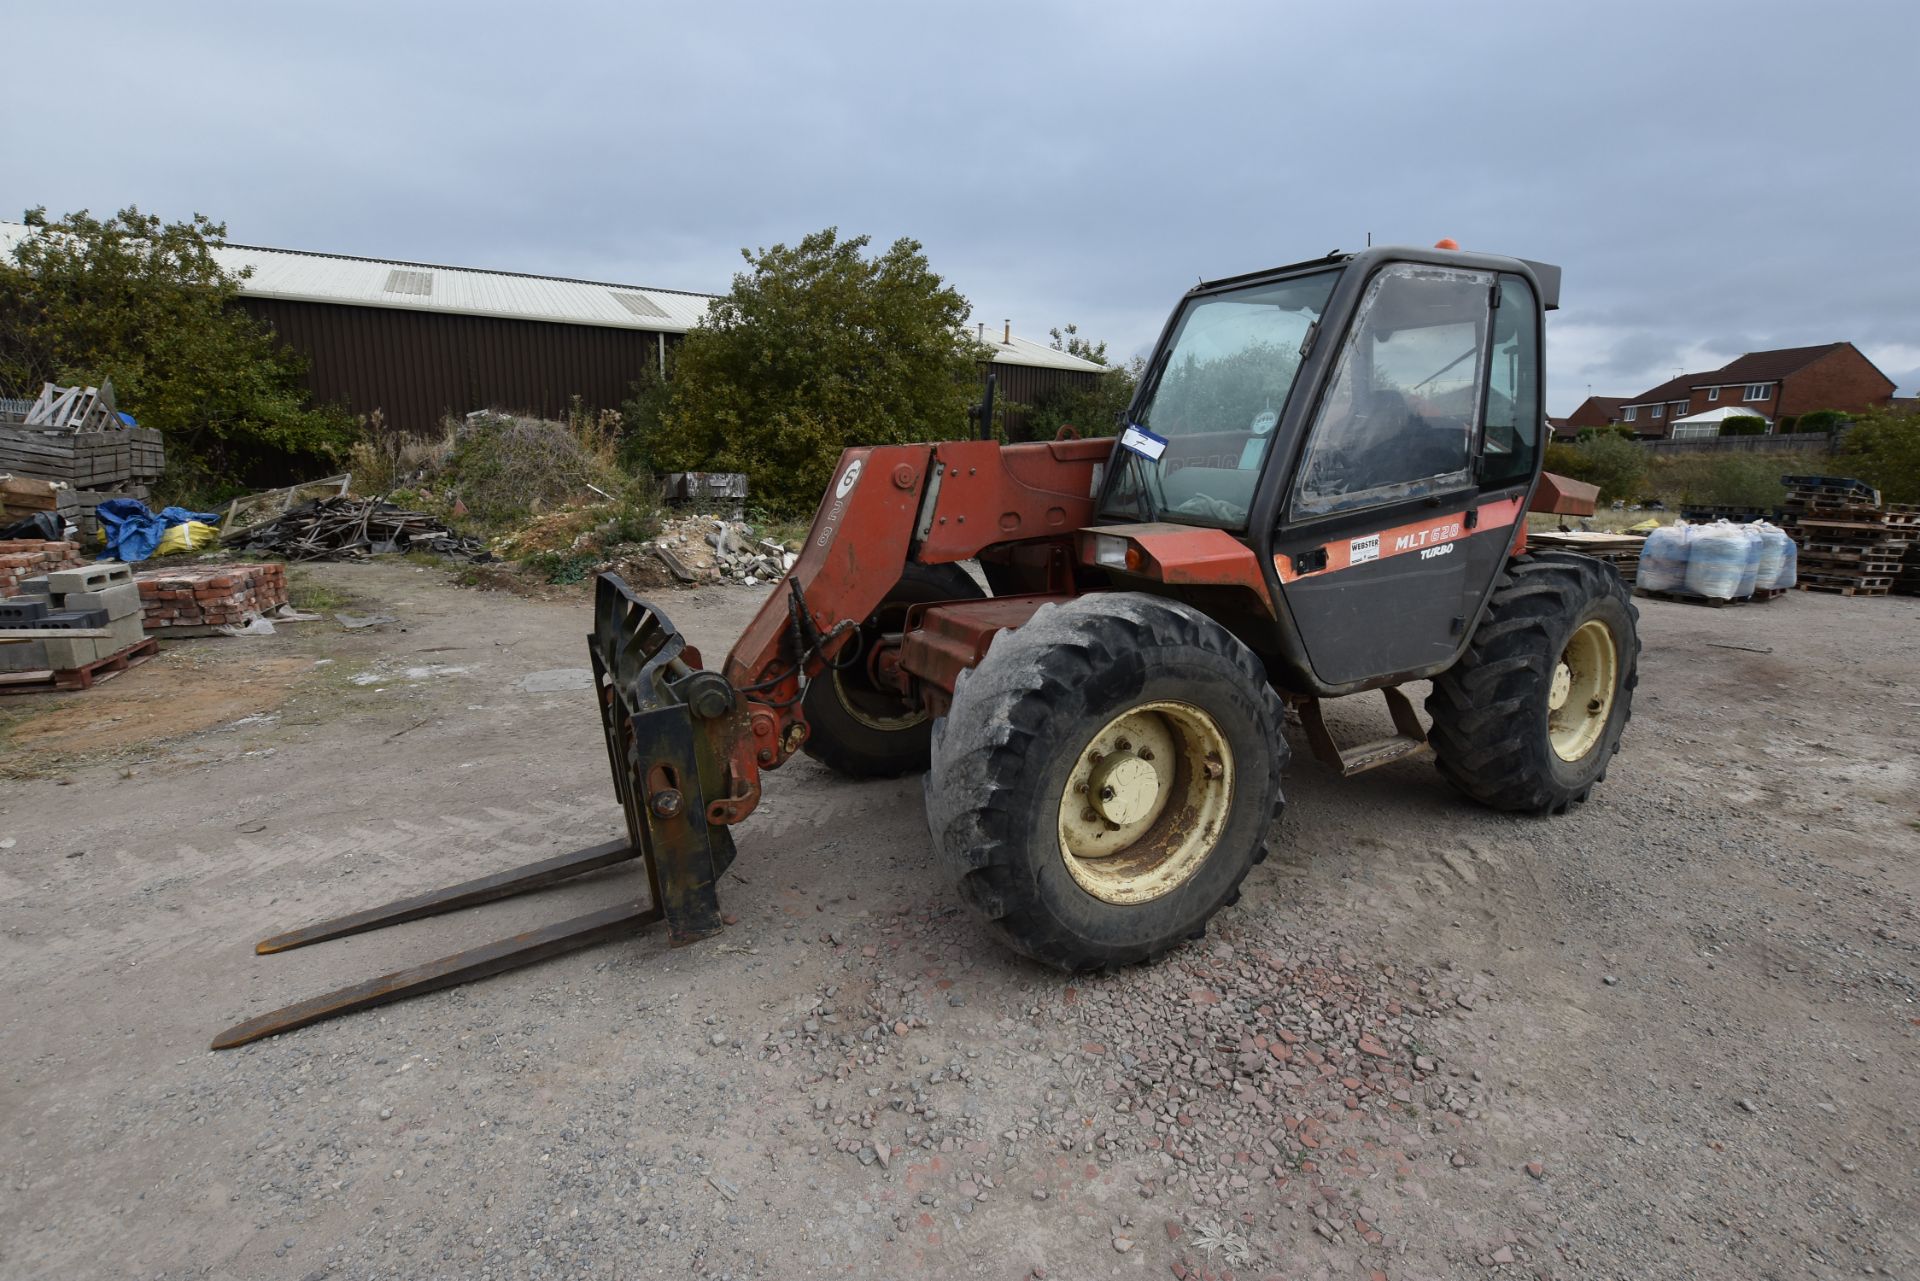 Minitou MLT628 Turbo Tele Handler, Model: MLT628T, Serial Number: 133788, Chassis Number: 1133788,